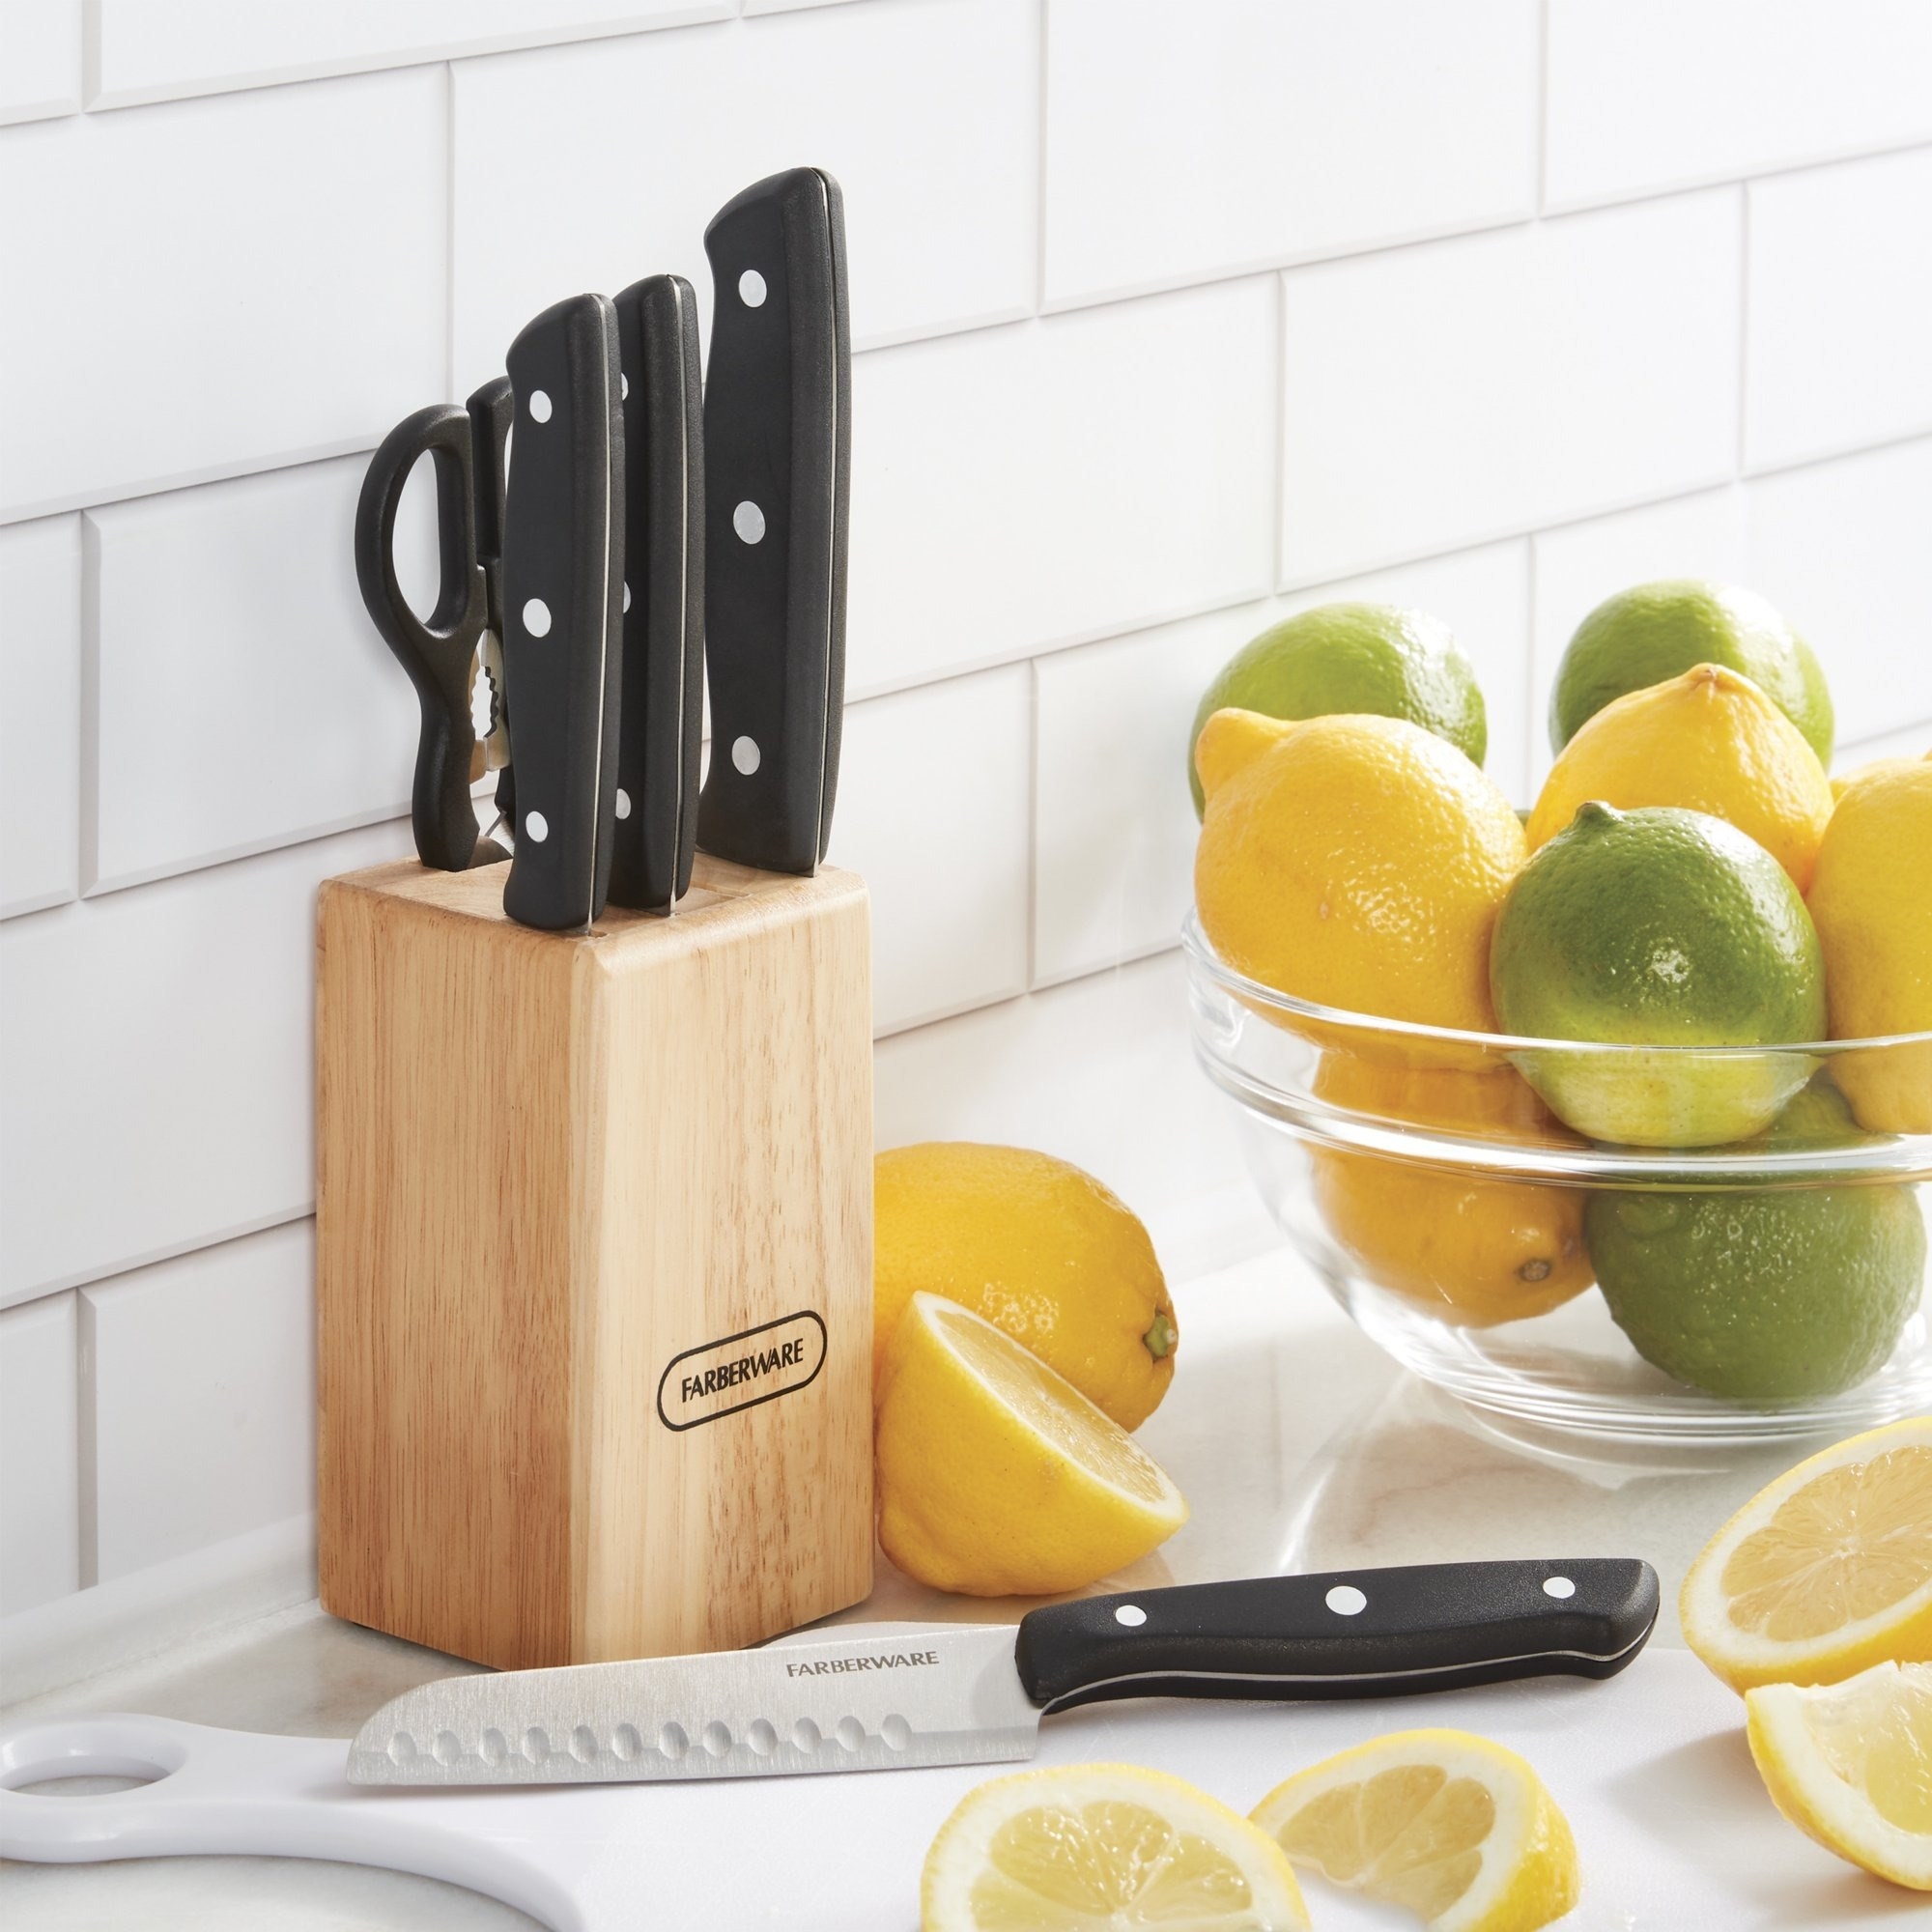 The knife set with a wooden block on a kitchen counter